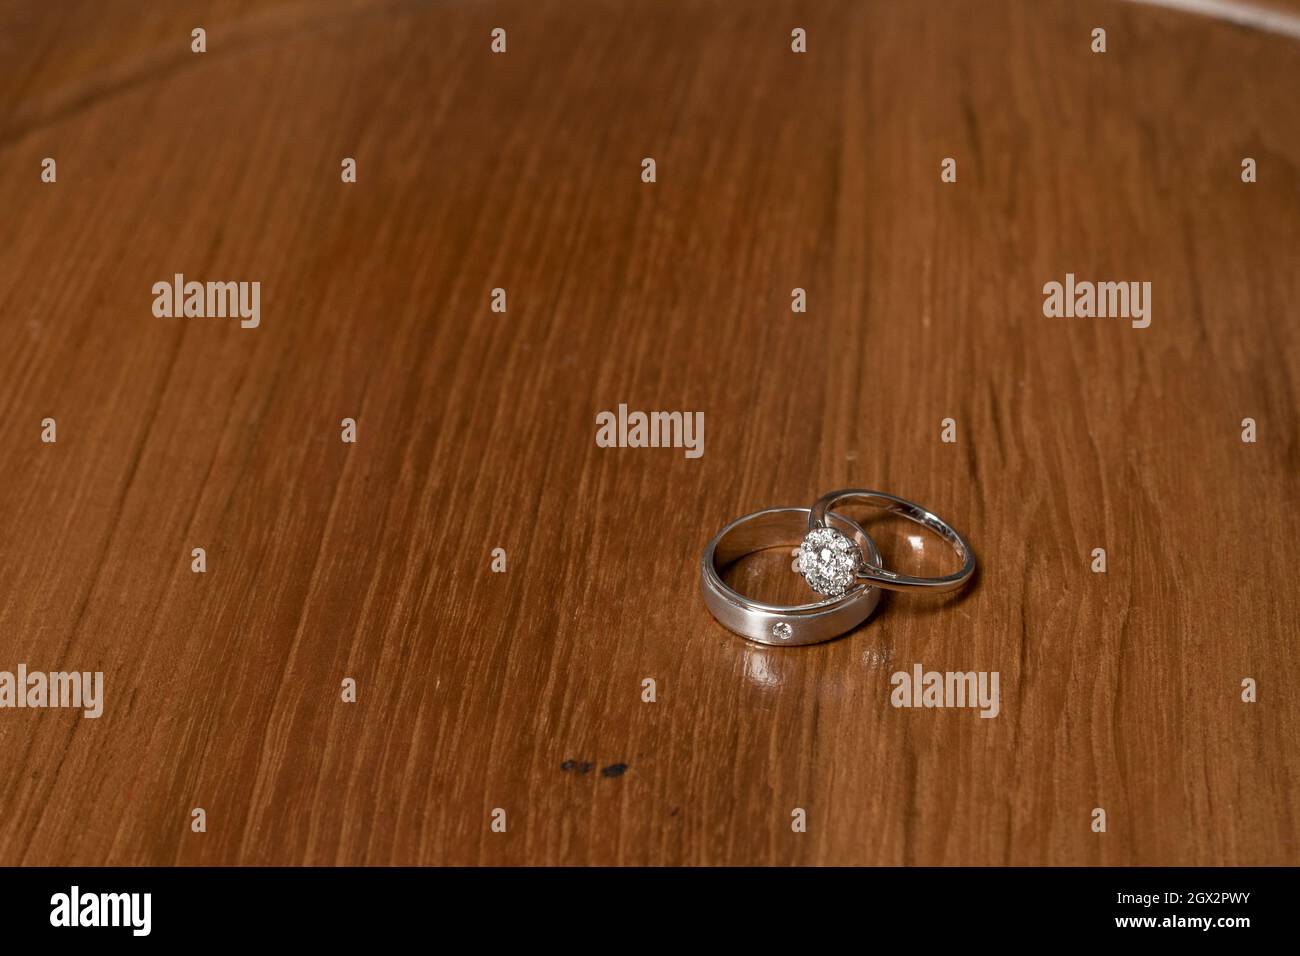 Close-up Of Wedding Rings On Wooden Table Stock Photo